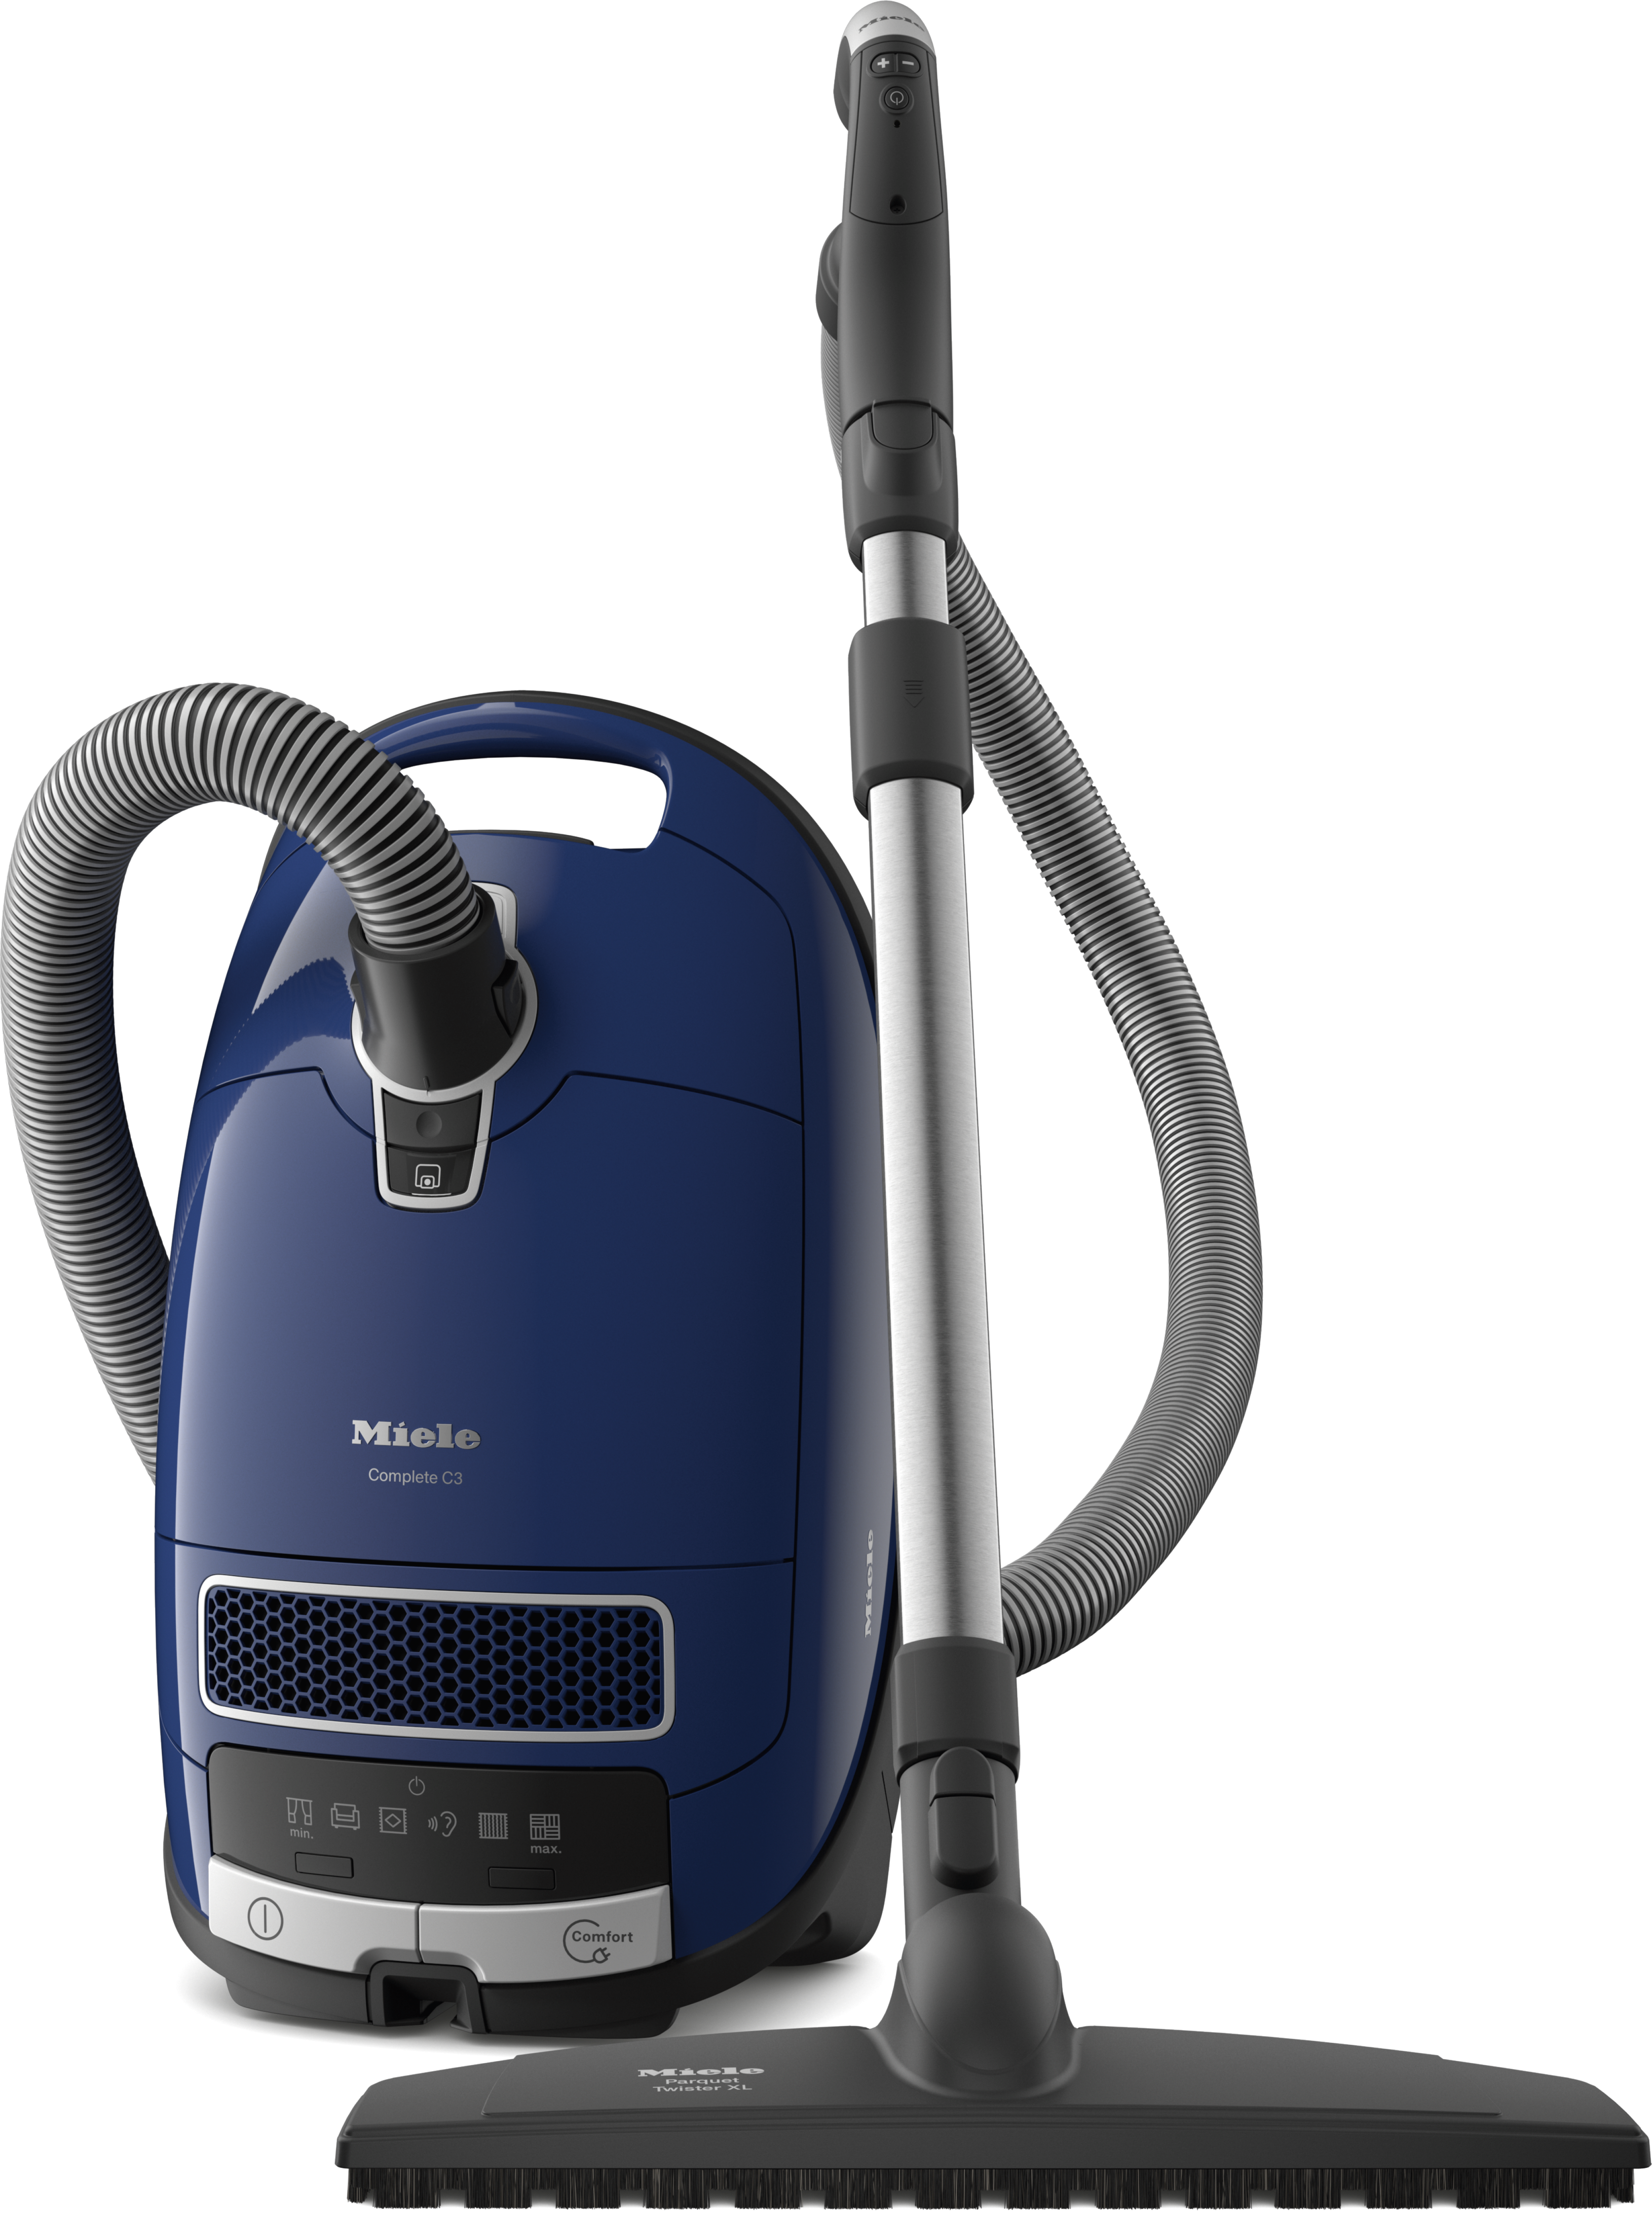 Complete C3 Comfort XLCylinder vacuum cleaner with comprehensive accessories for nearly every cleaning challenge.